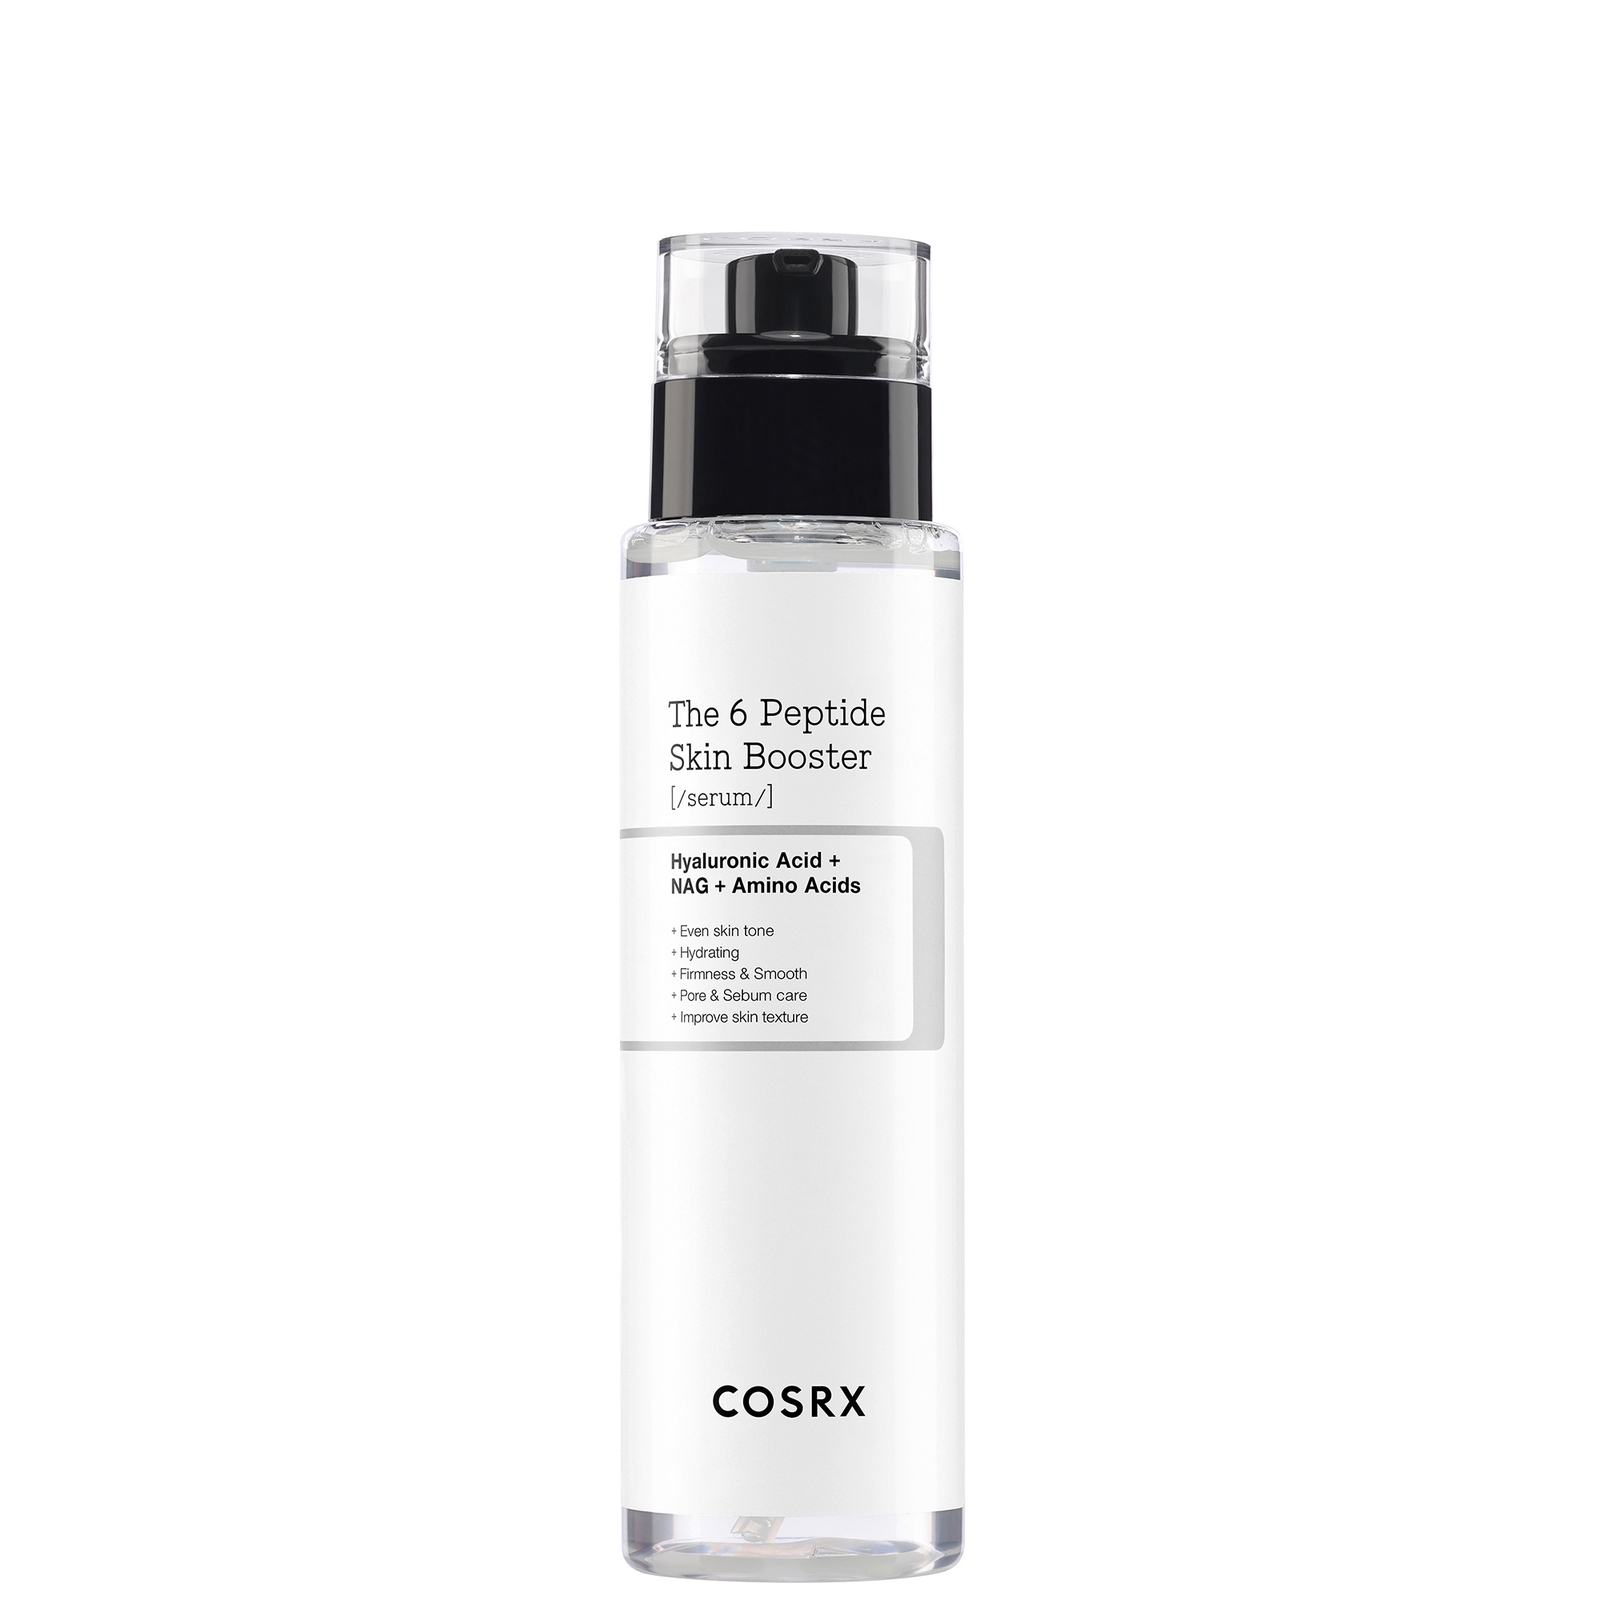 Image of COSRX The 6 Peptide Skin Booster Serum 150ml